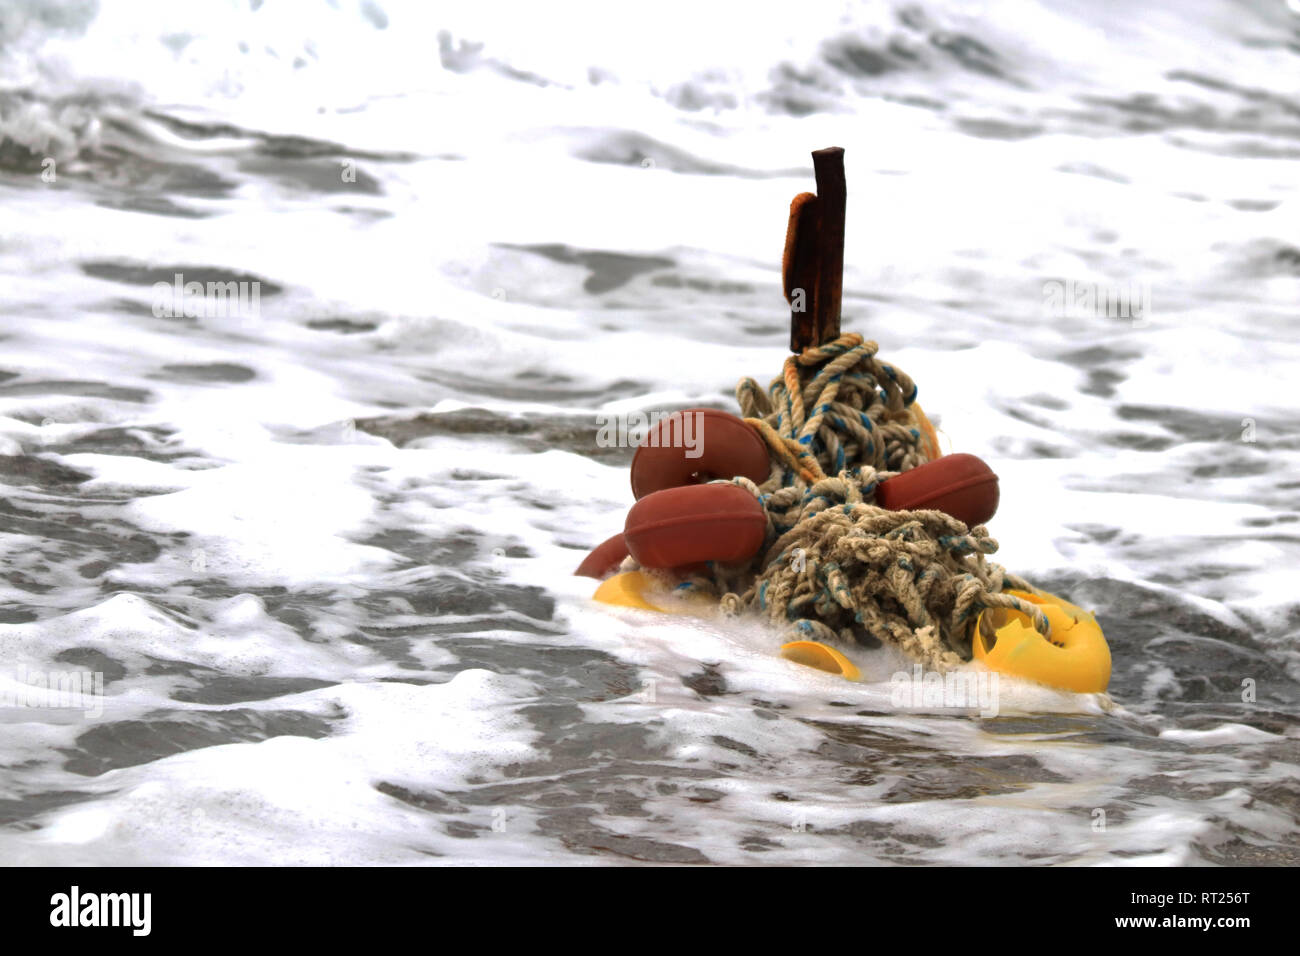 Iron stake with wound ropes and buoys in the breaking wave Stock Photo